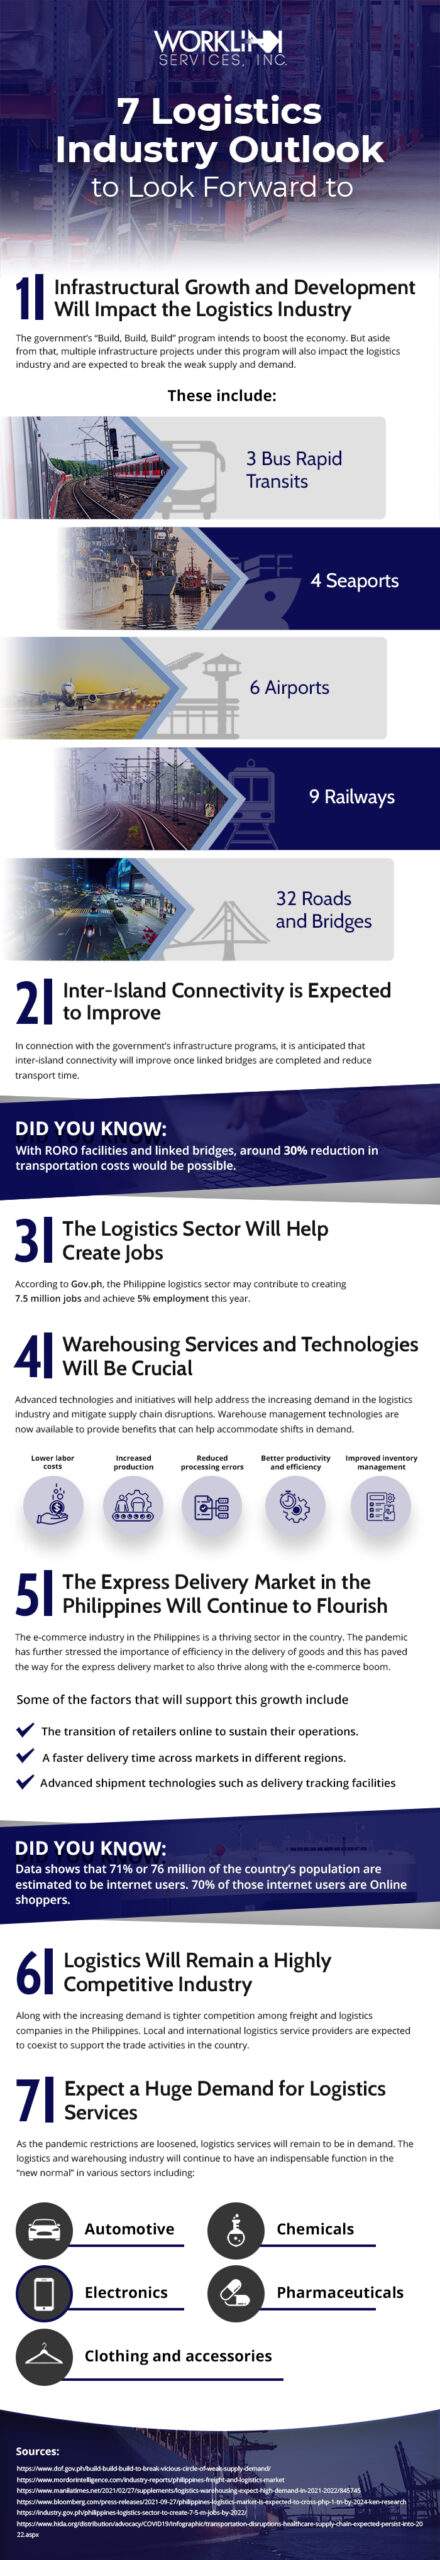 7 Interesting Logistics Industry Outlook for 2022